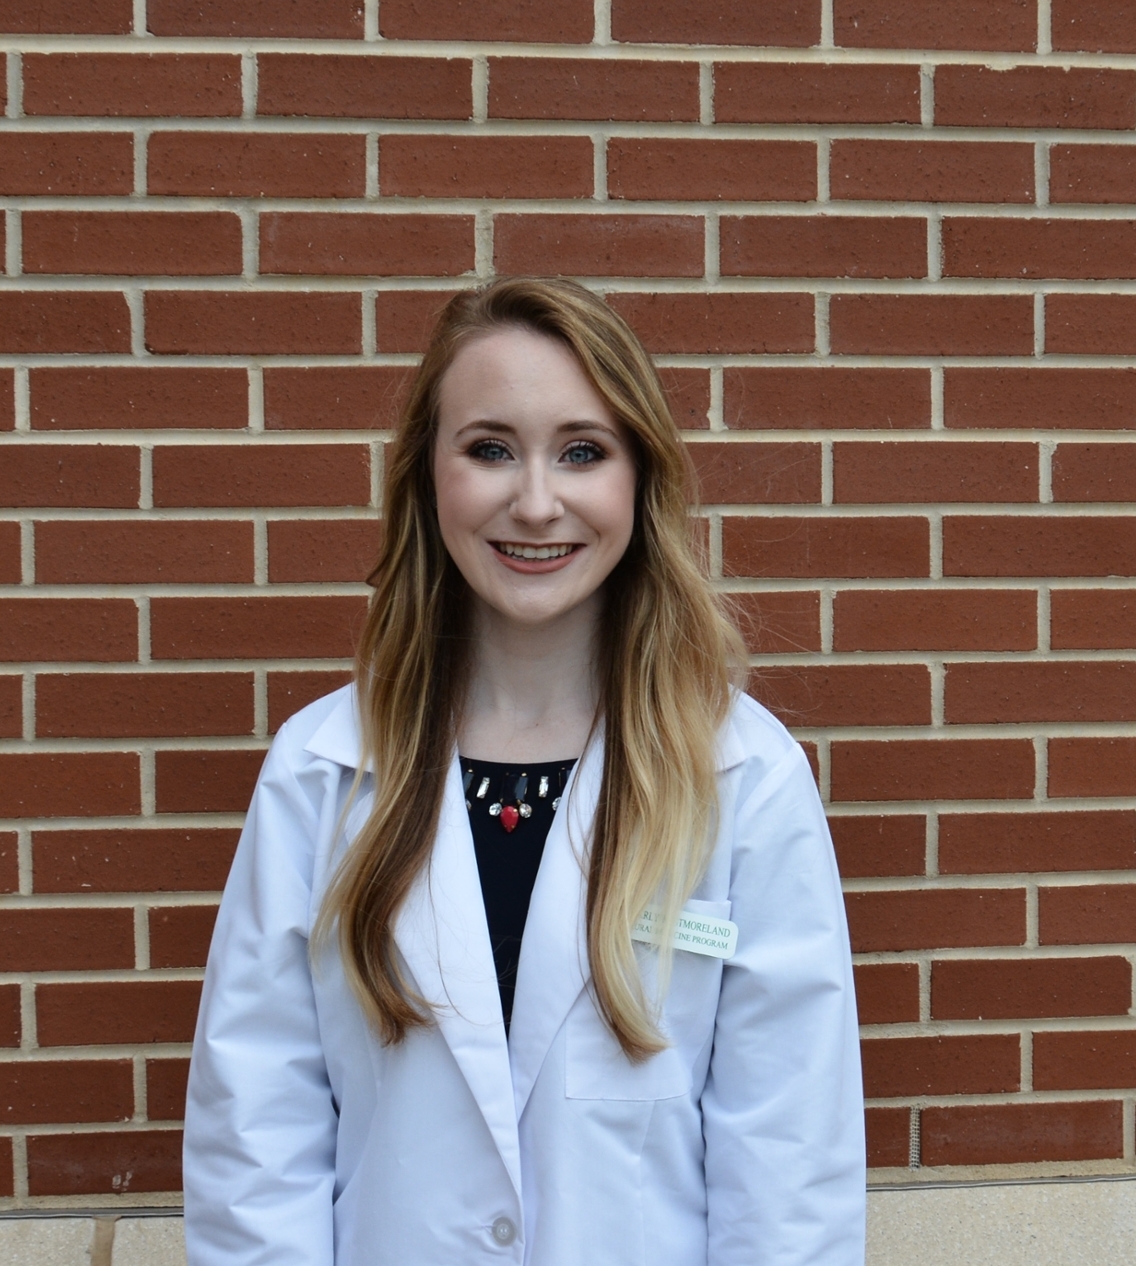 COSAM Student Plans to Serve Small Communities through Health Care